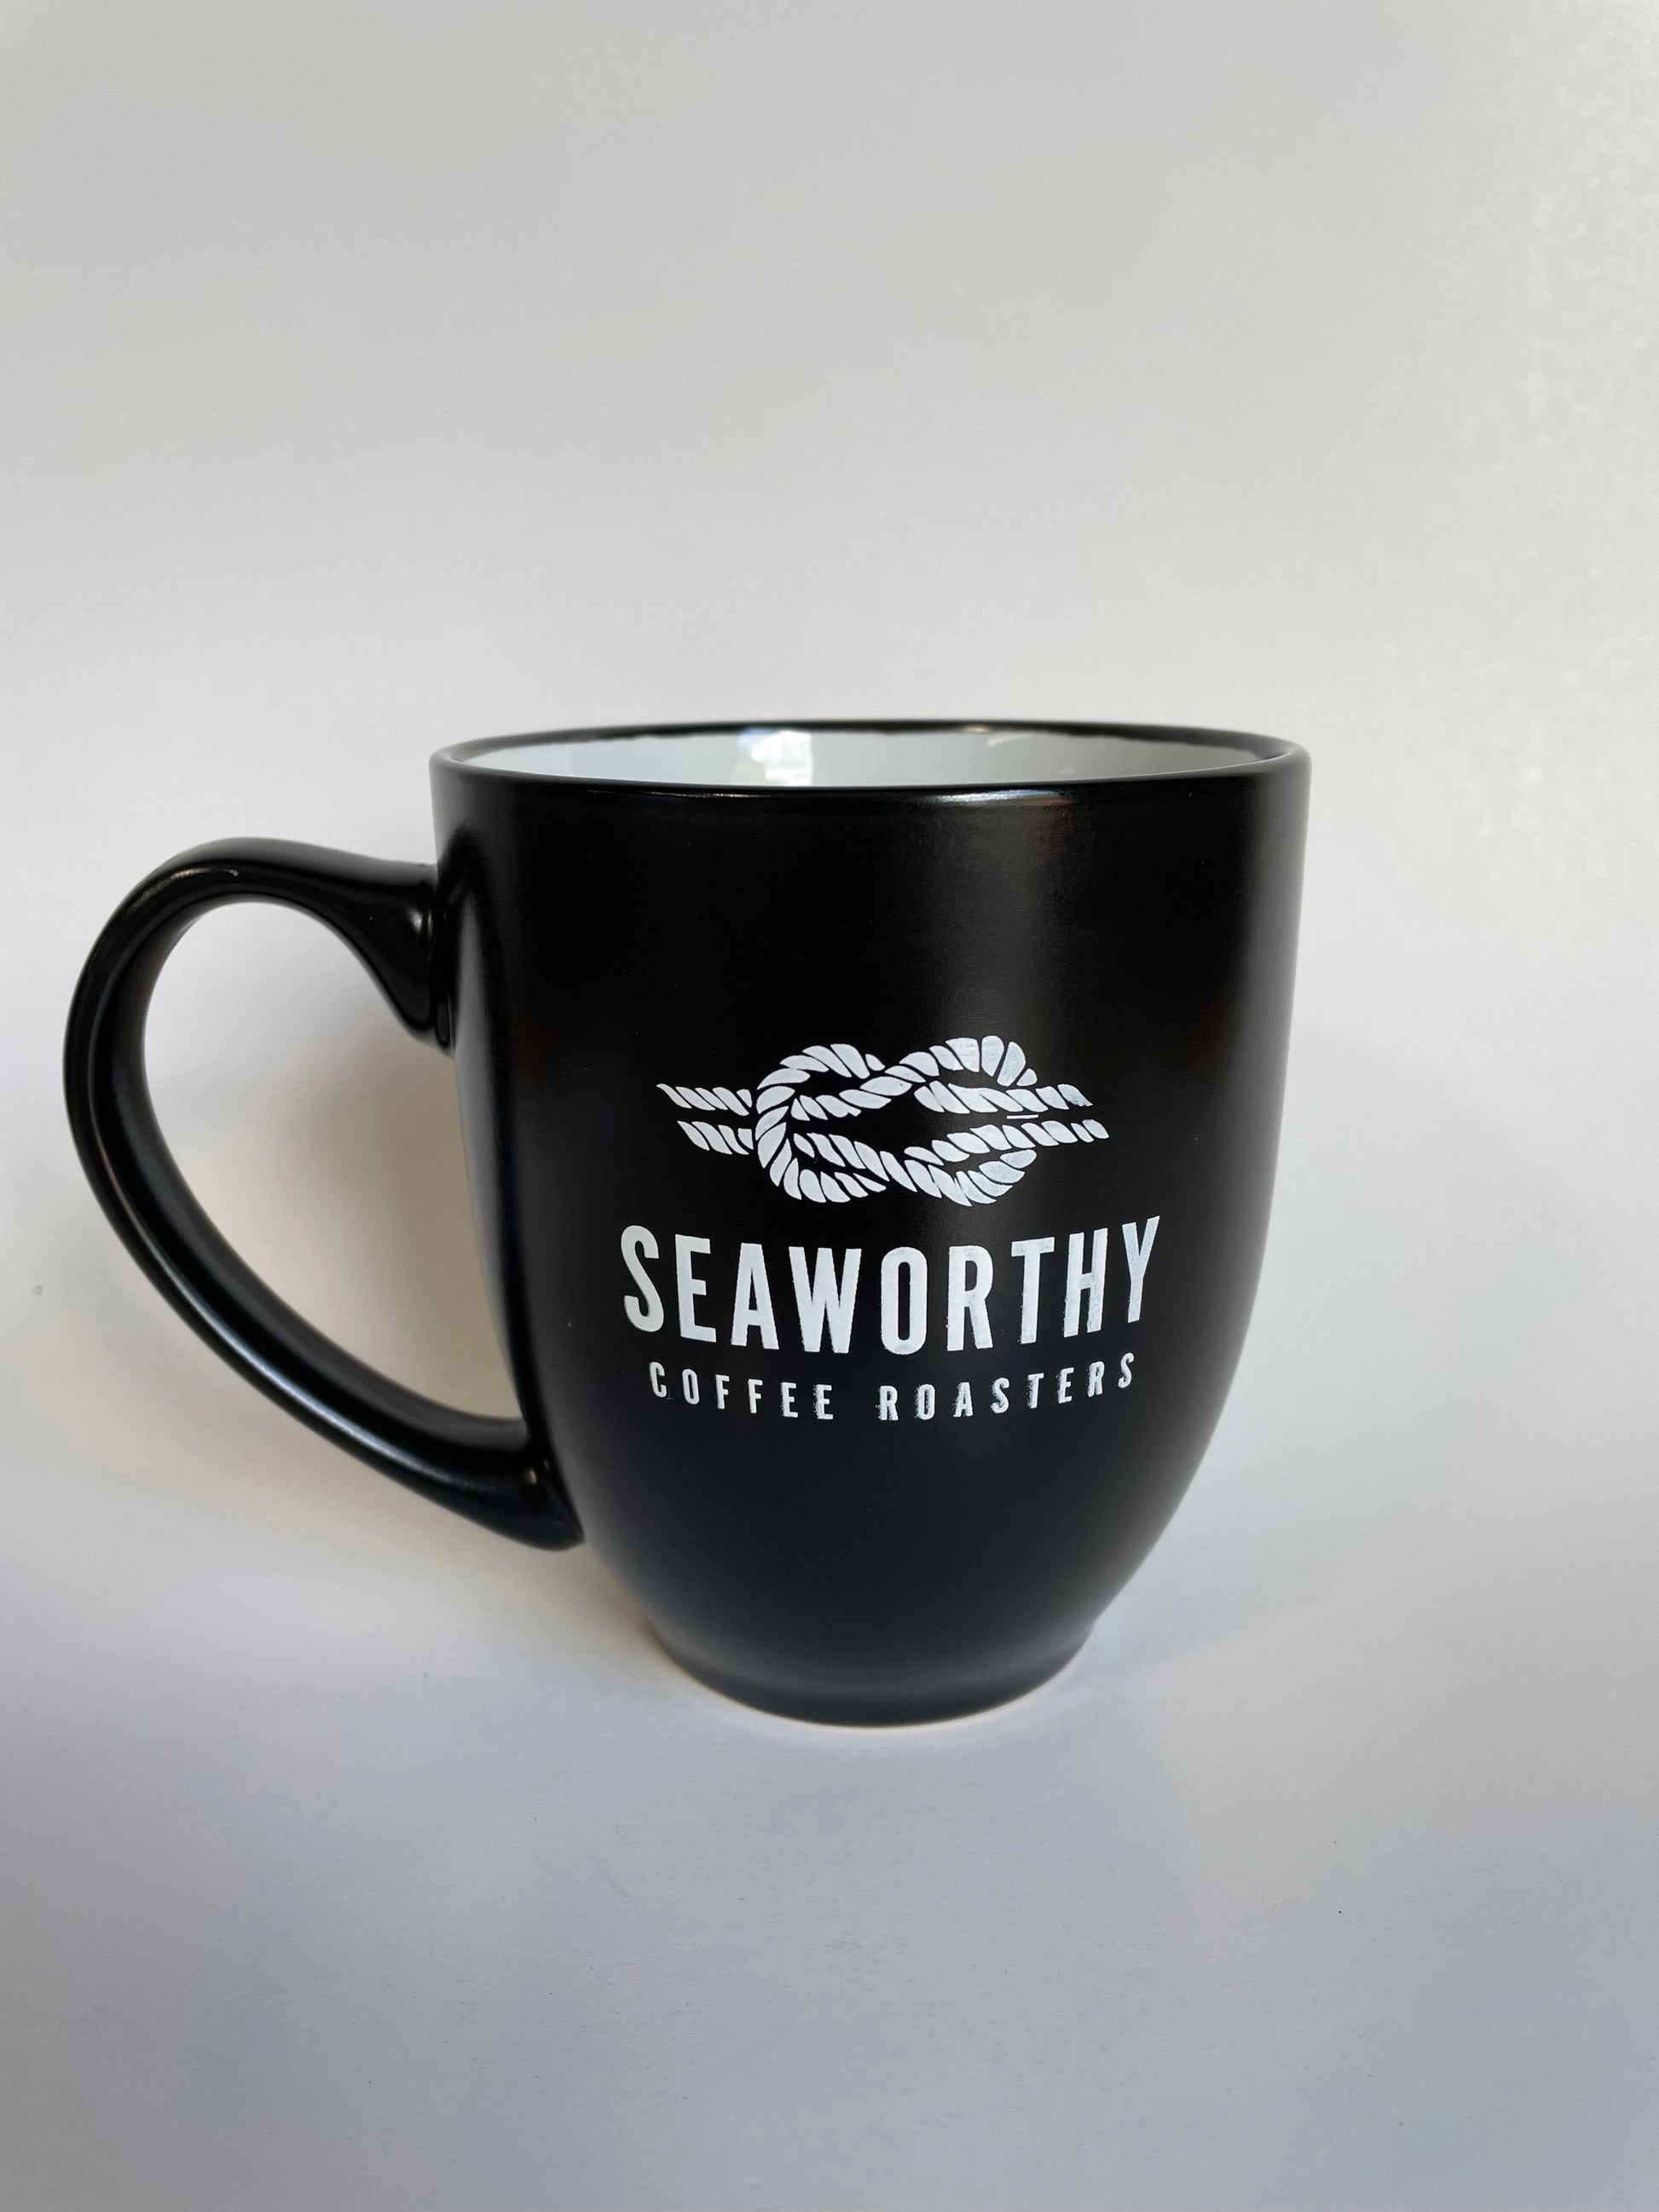 Our second edition mugs are here!  The Seaworthy Black & White Ceramic Mug has a 16 ounce capacity, features a nice big handle, and looks sharp with our slow roasted coffee in it.  